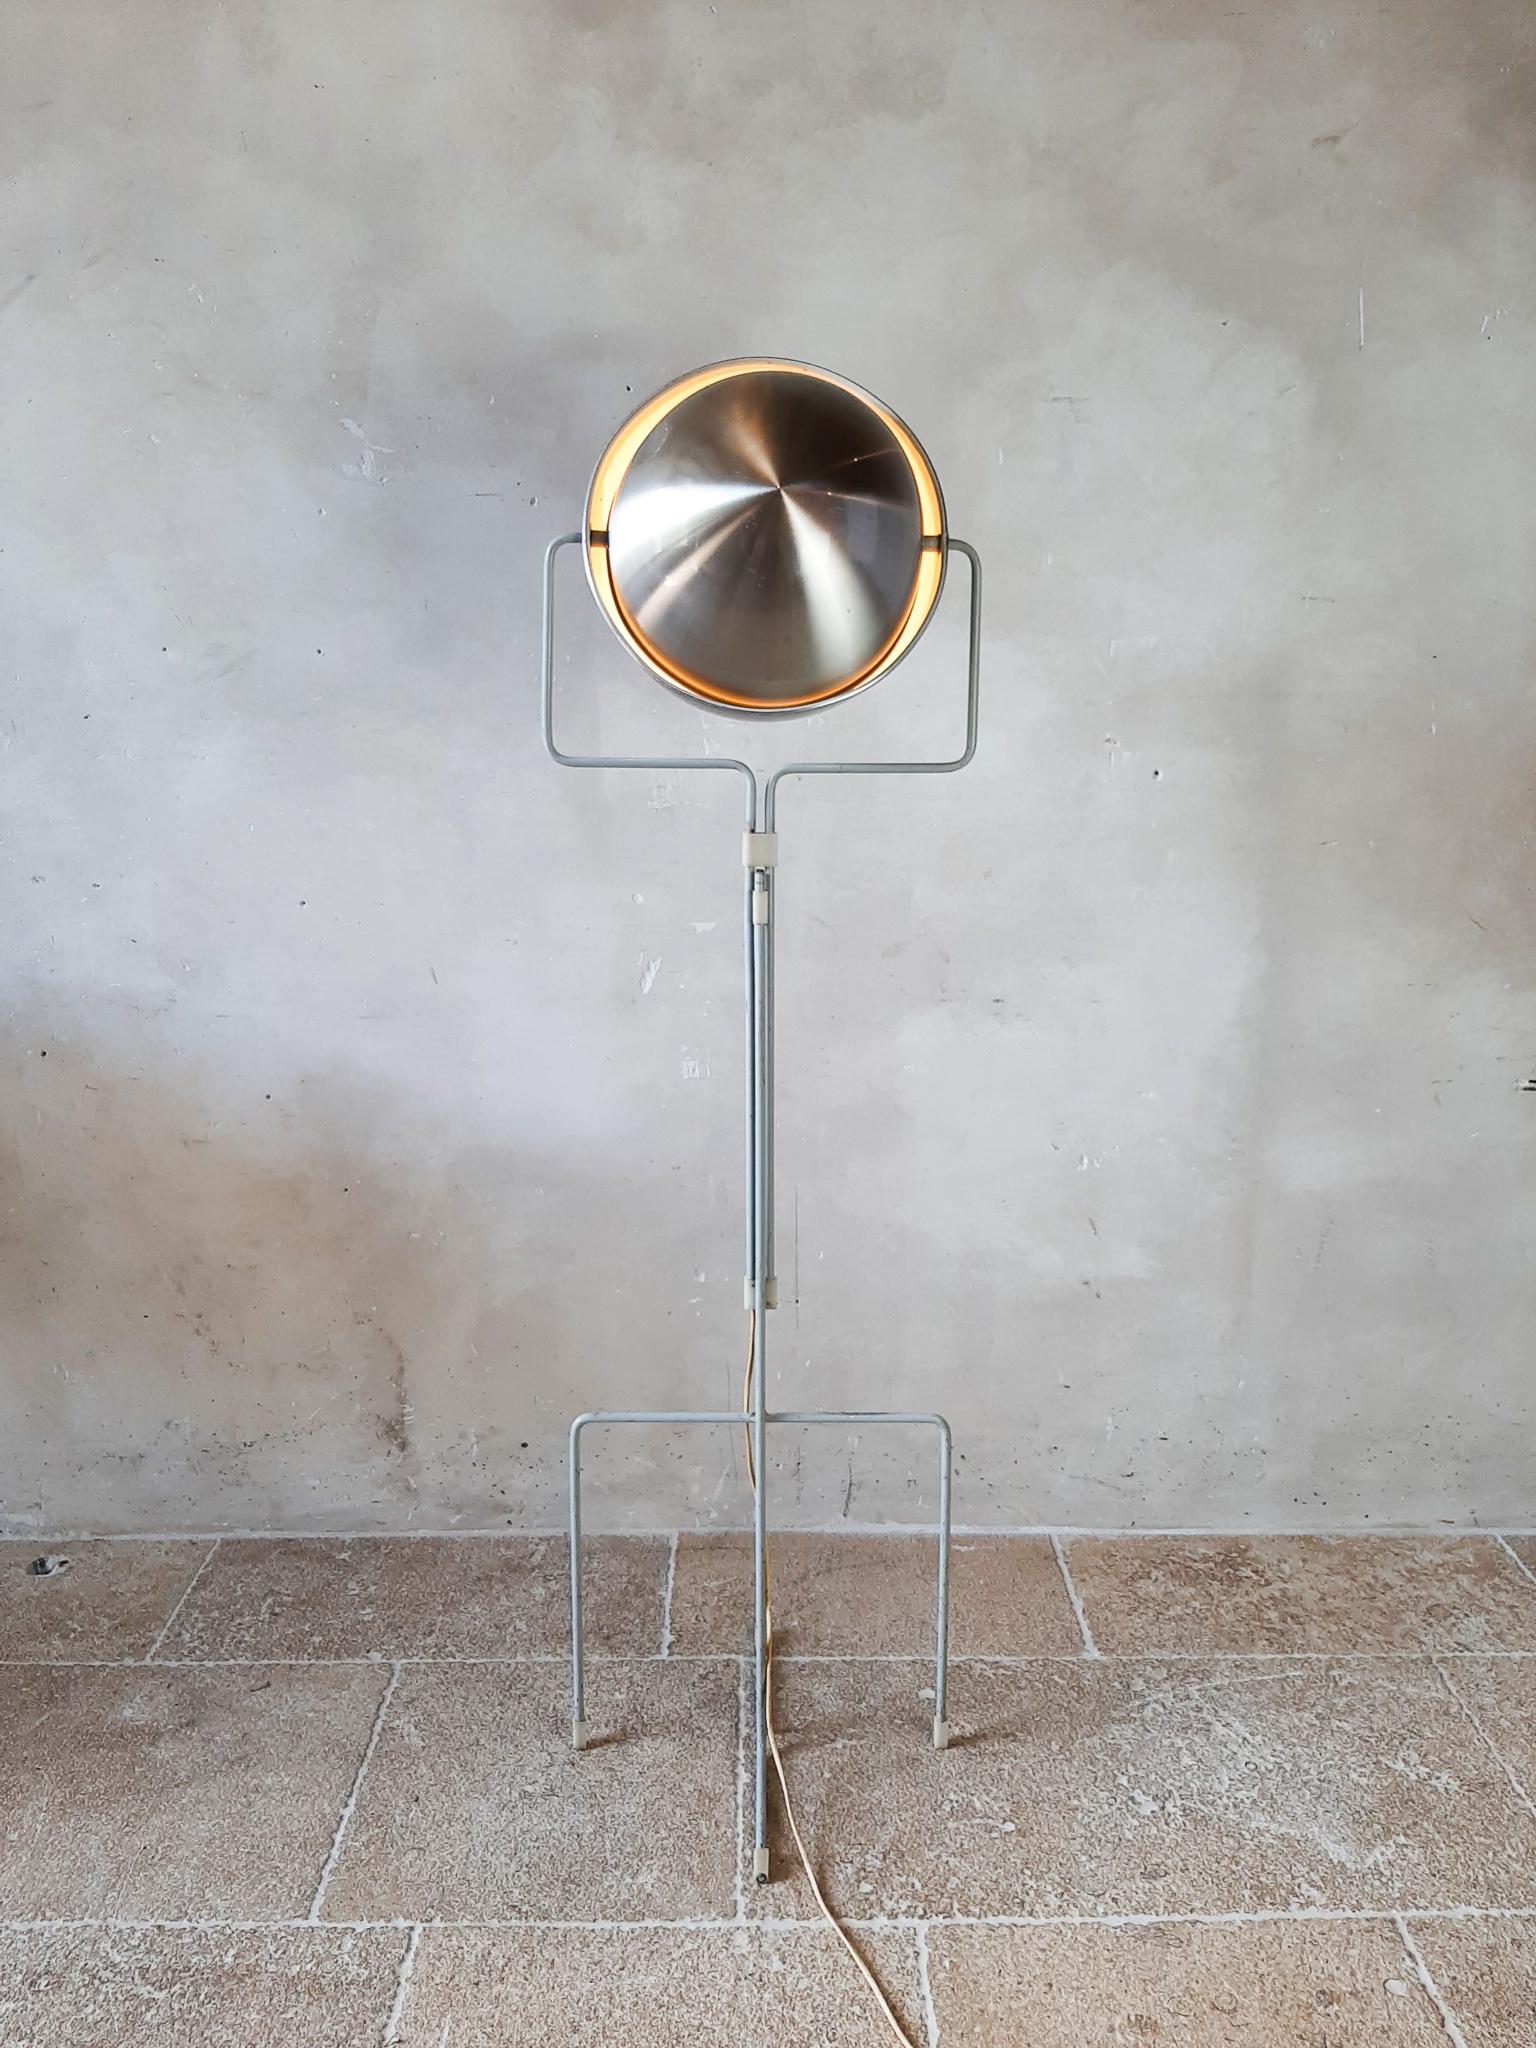 Dutch Modernist floor lamp designed by Architect E.J. Jelles for RAAK Amsterdam, Holland, 1960s. This designer floor lamp has a grey painted symmetrical base which is adjustable in height. The shade can be turned into many different positions making